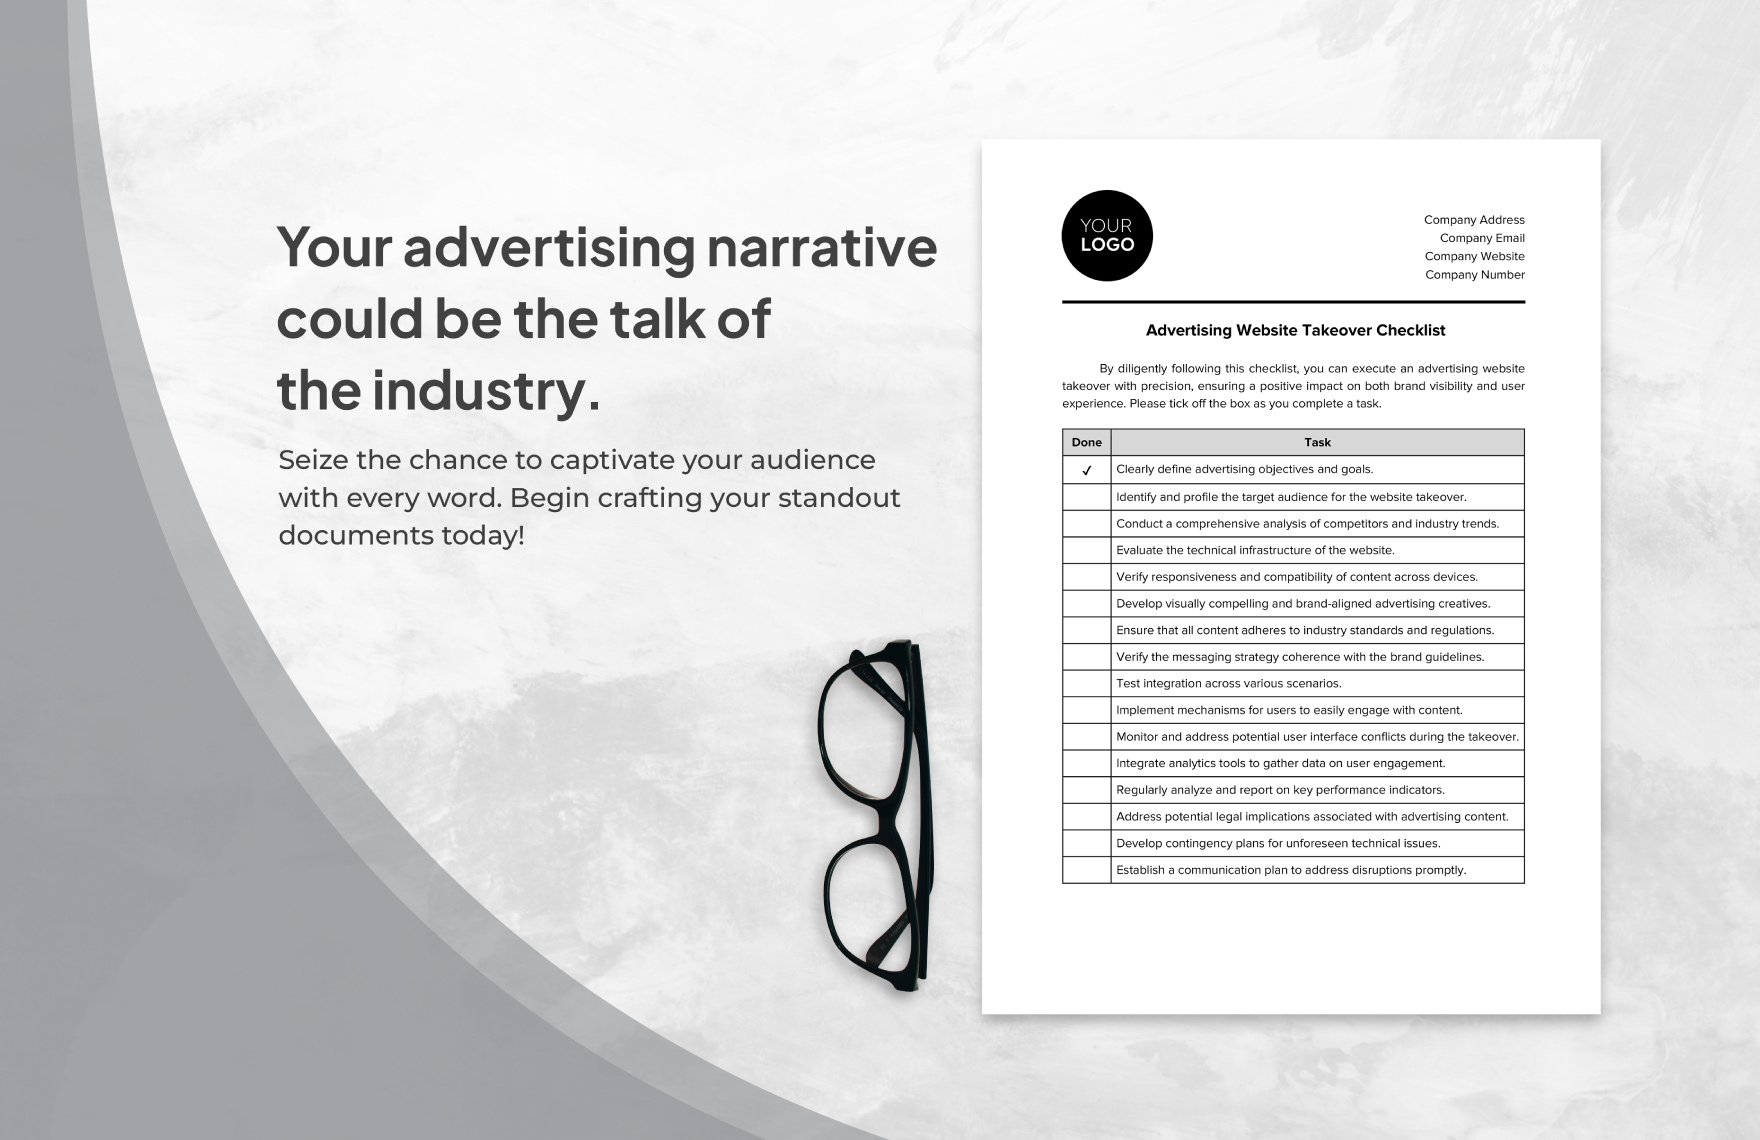 Advertising Website Takeover Checklist Template